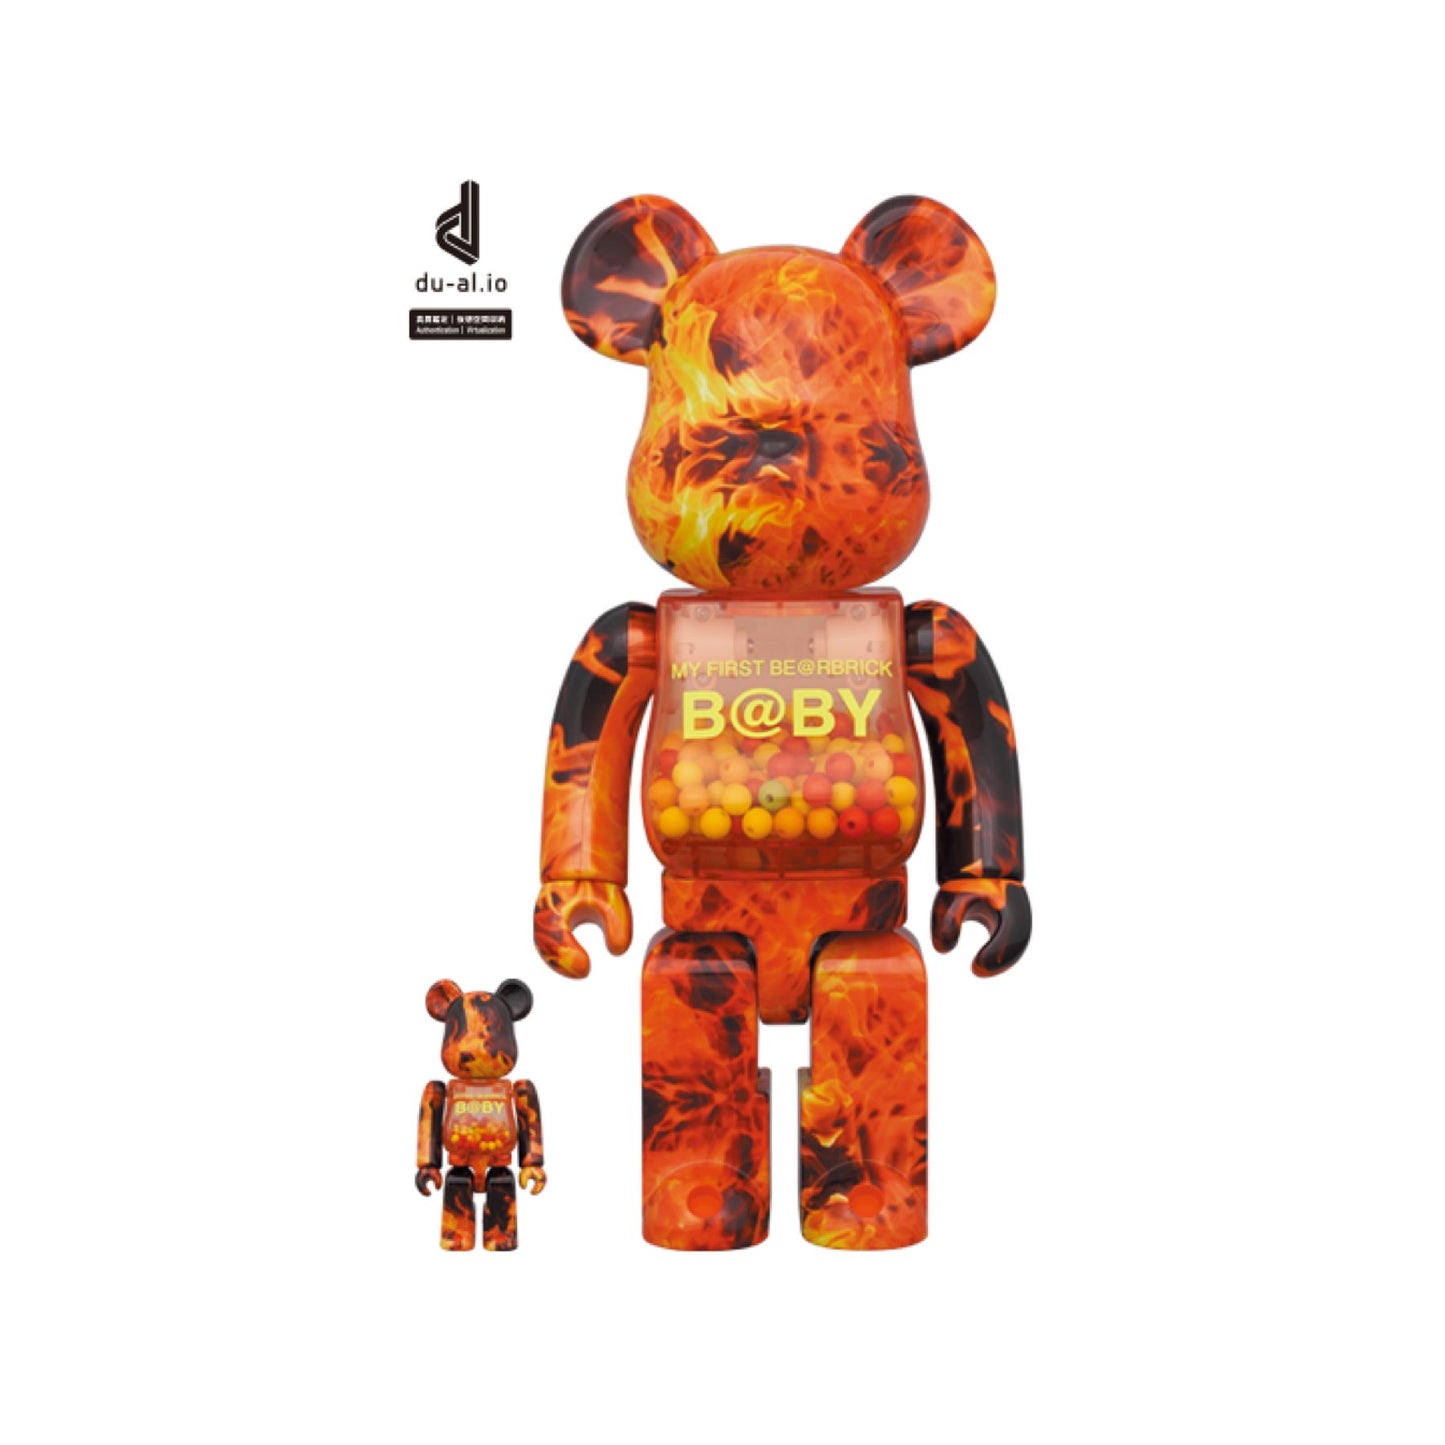 100% &amp; 400% Be@rbrick MON PREMIER BE@RBRICK B@BY FLAME Ver.